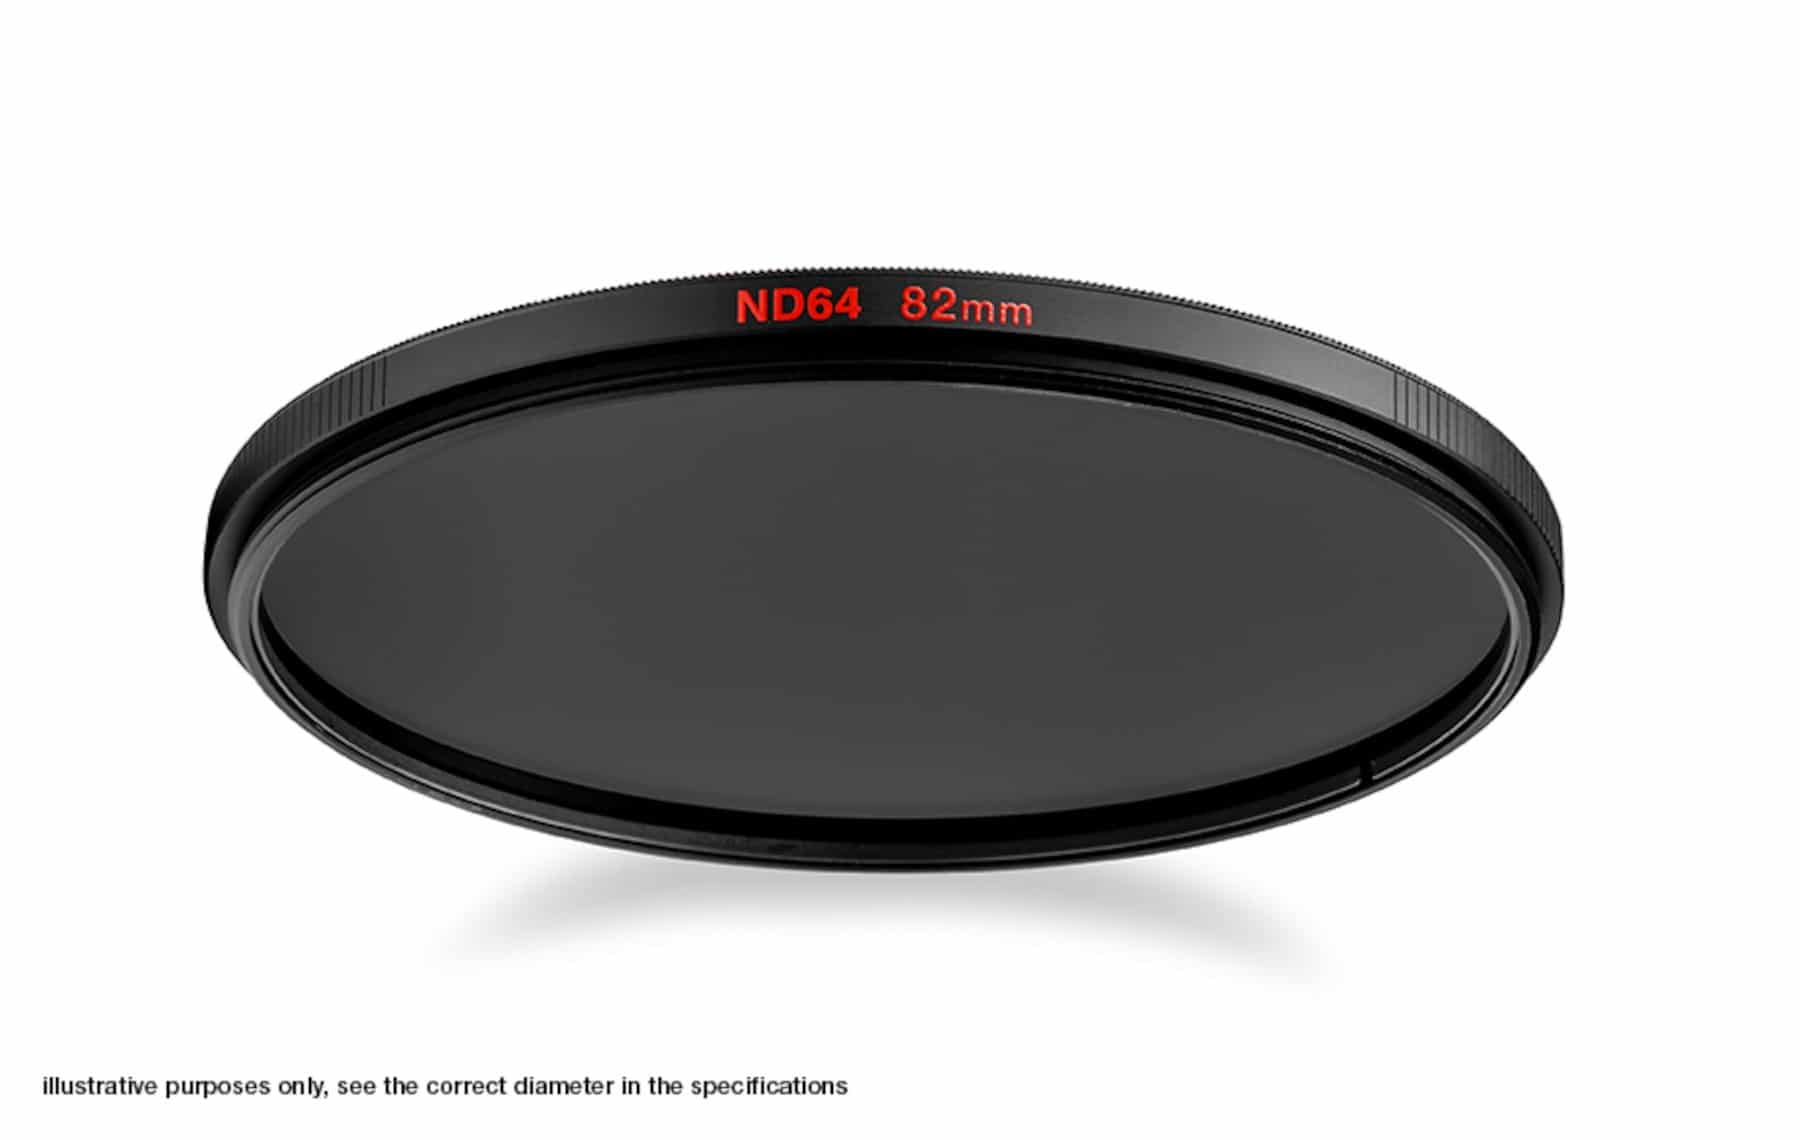 Manfrotto Neutral Density 64 Filter with 62mm diameter.